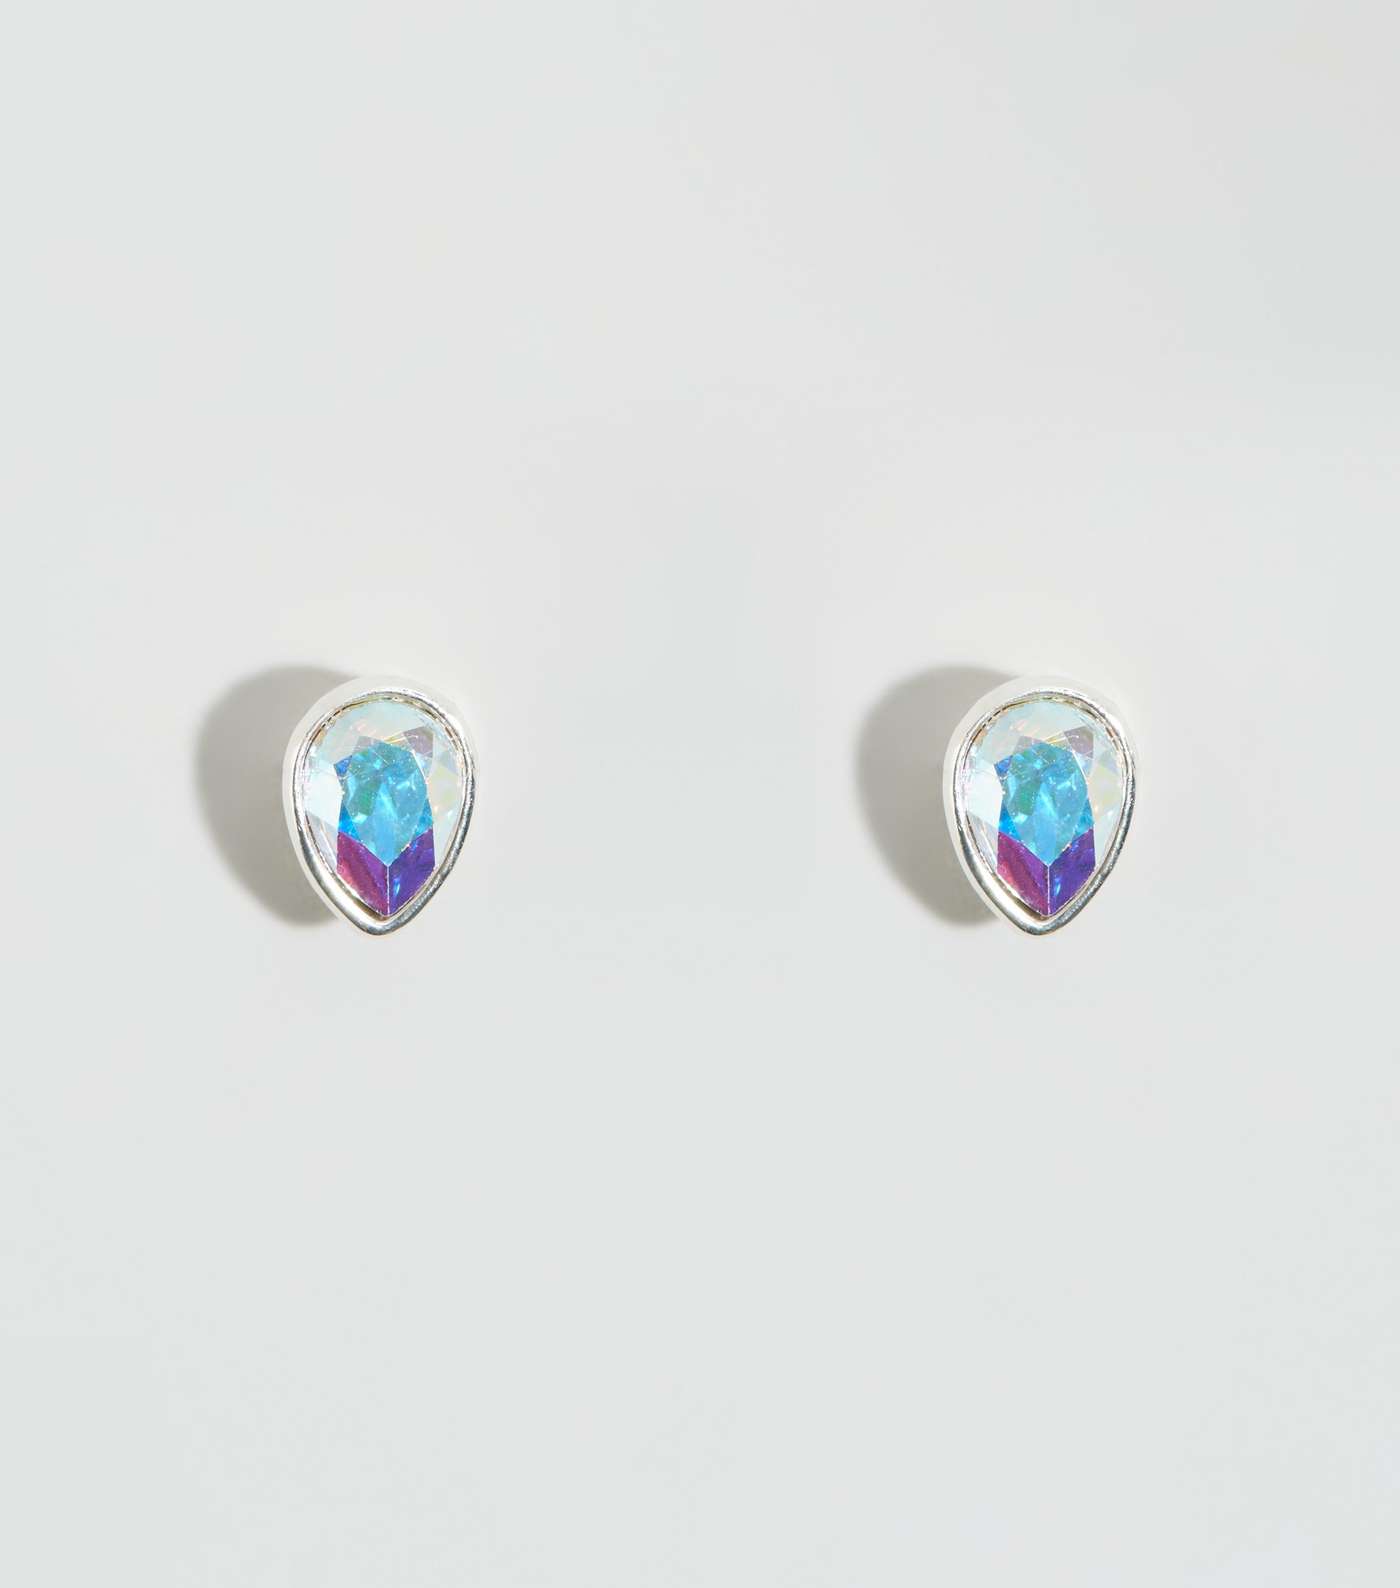 Silver Plated Teardrop Earrings with Crystals from Swarovski®